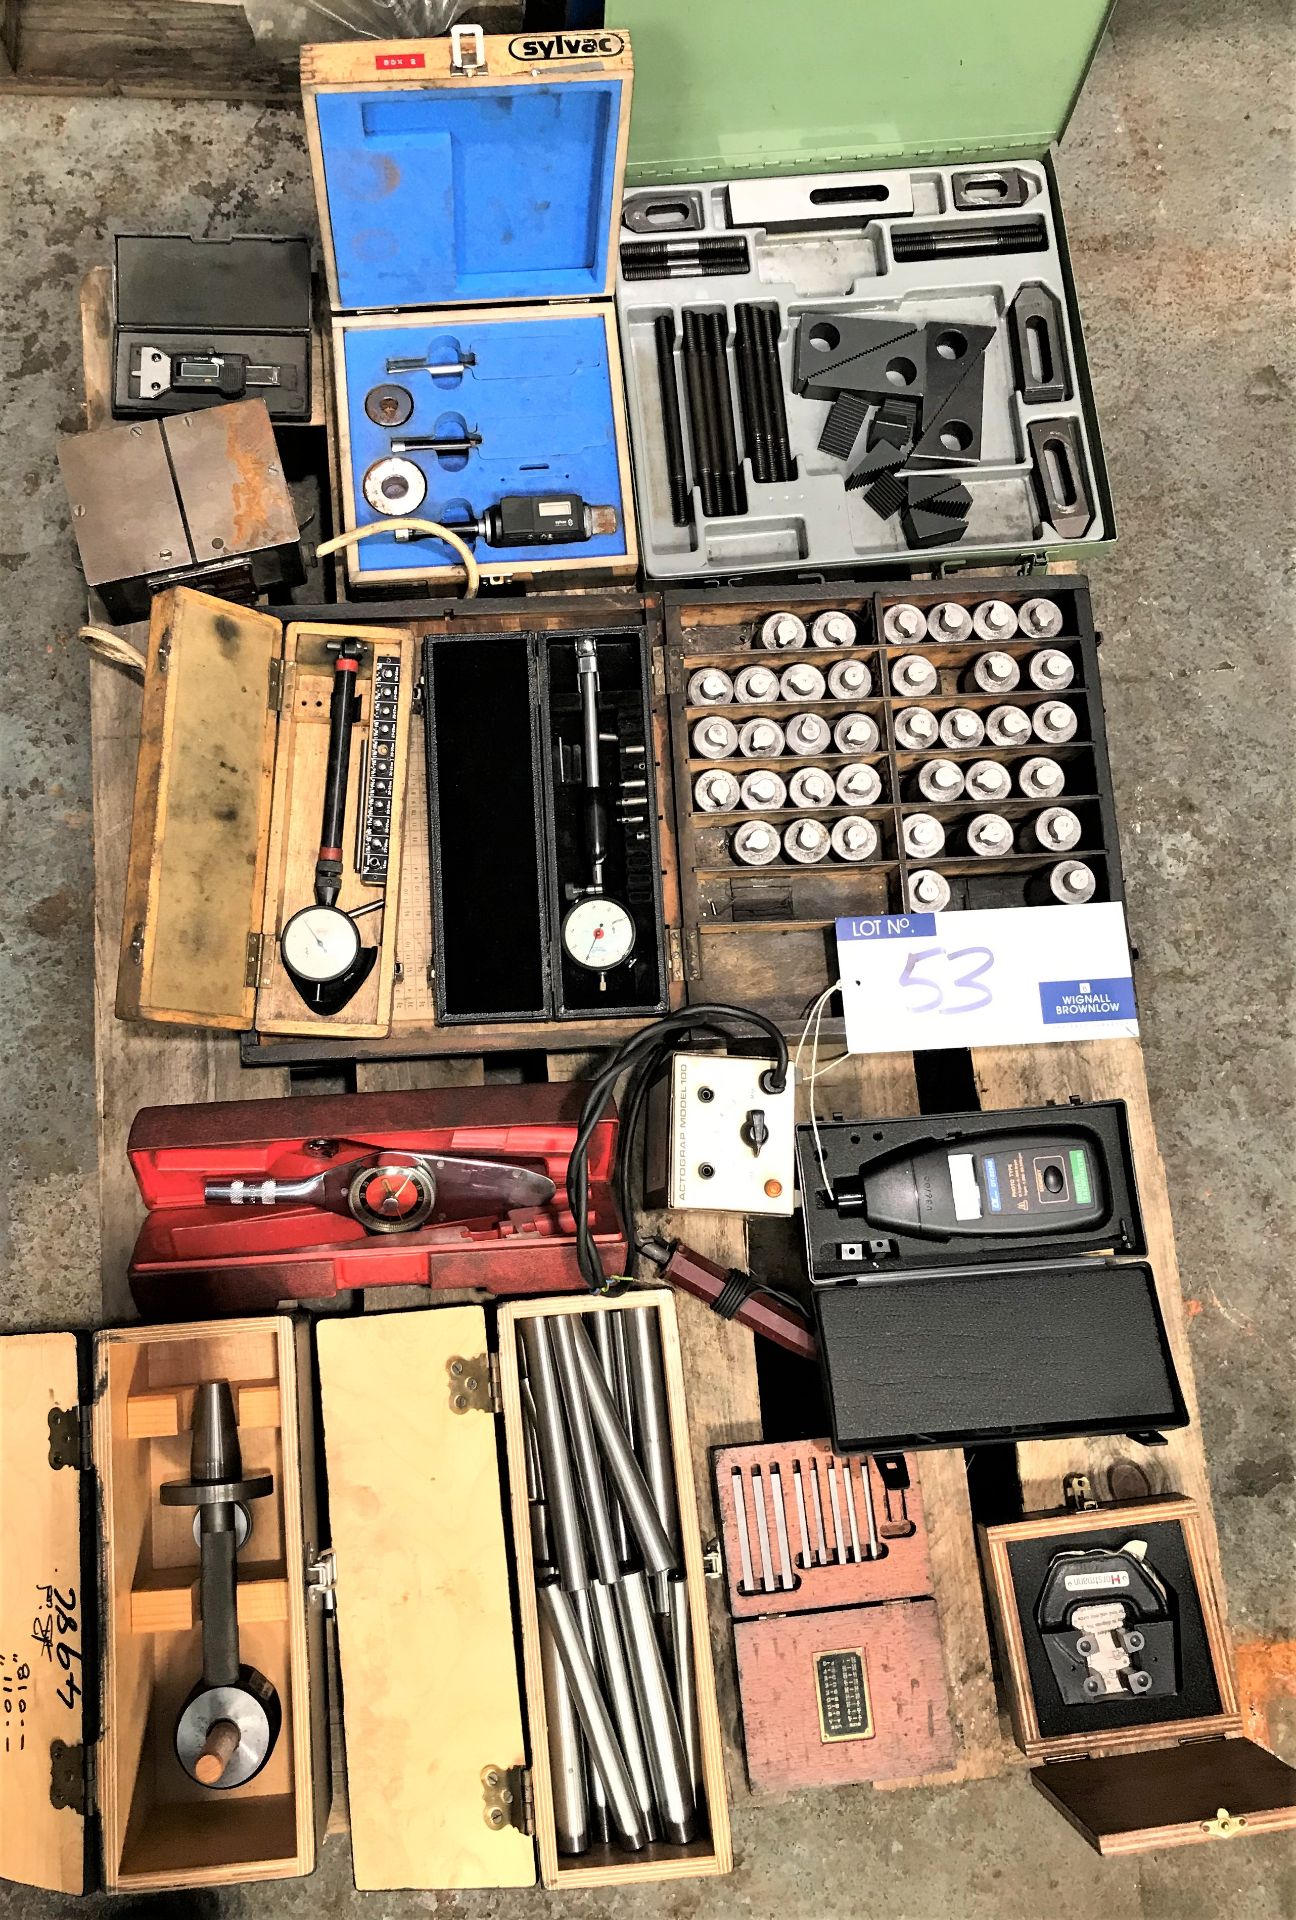 A Quantity of Miscellaneous Tools and Equipment.